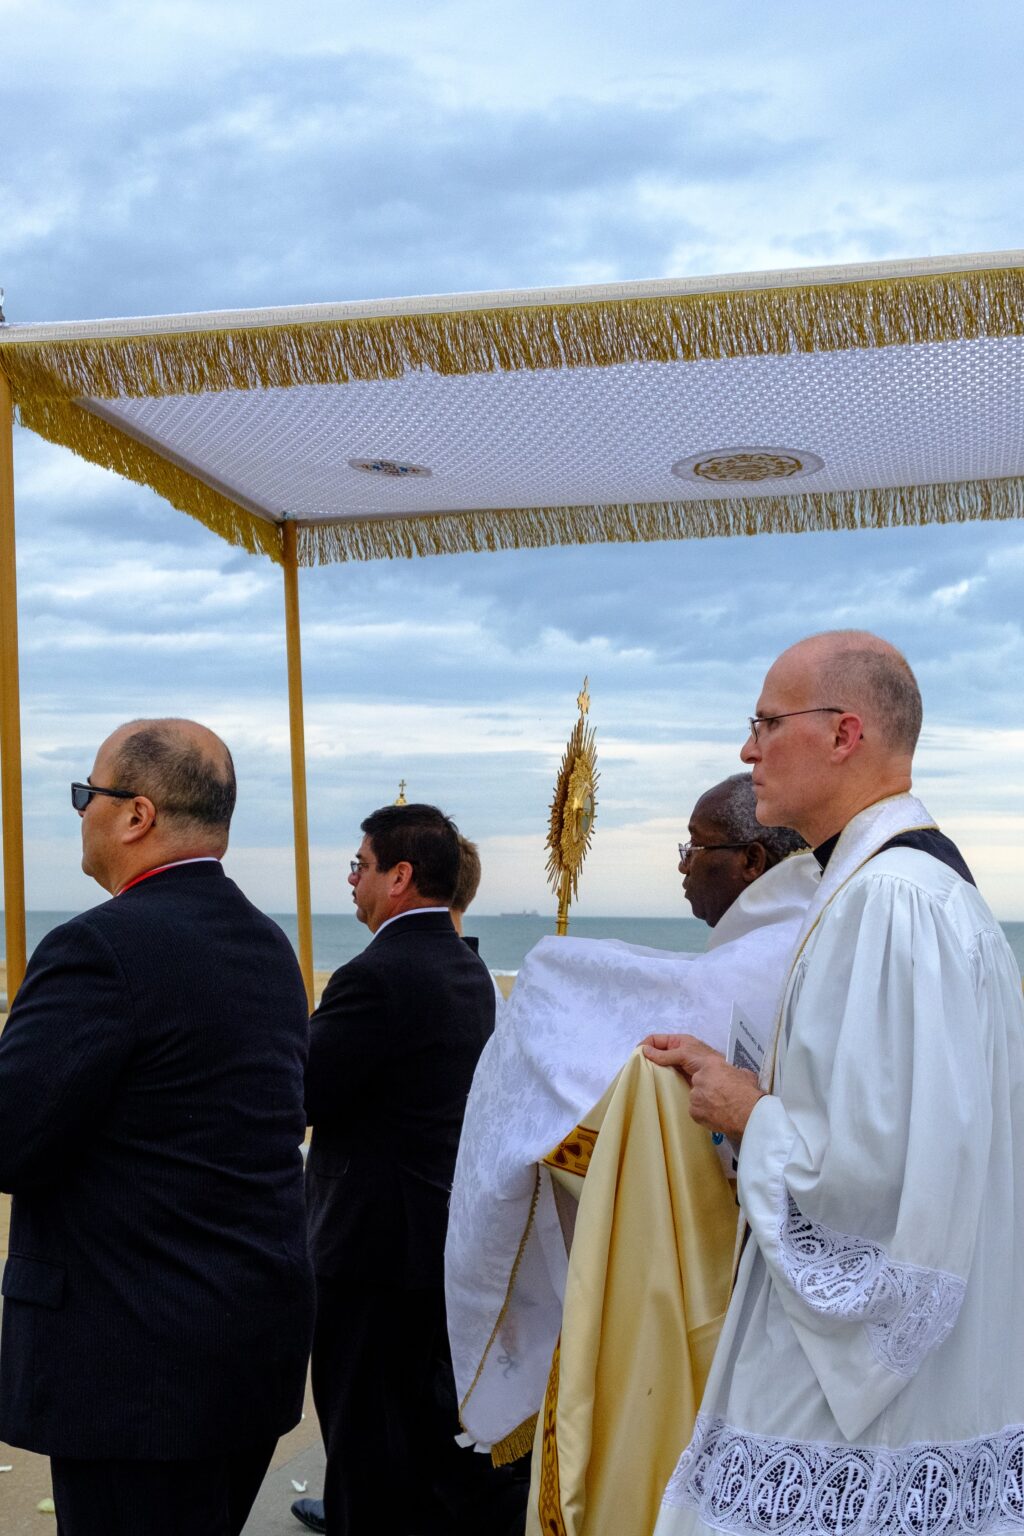 Why Catholic priests veil their hands while carrying the monstrance